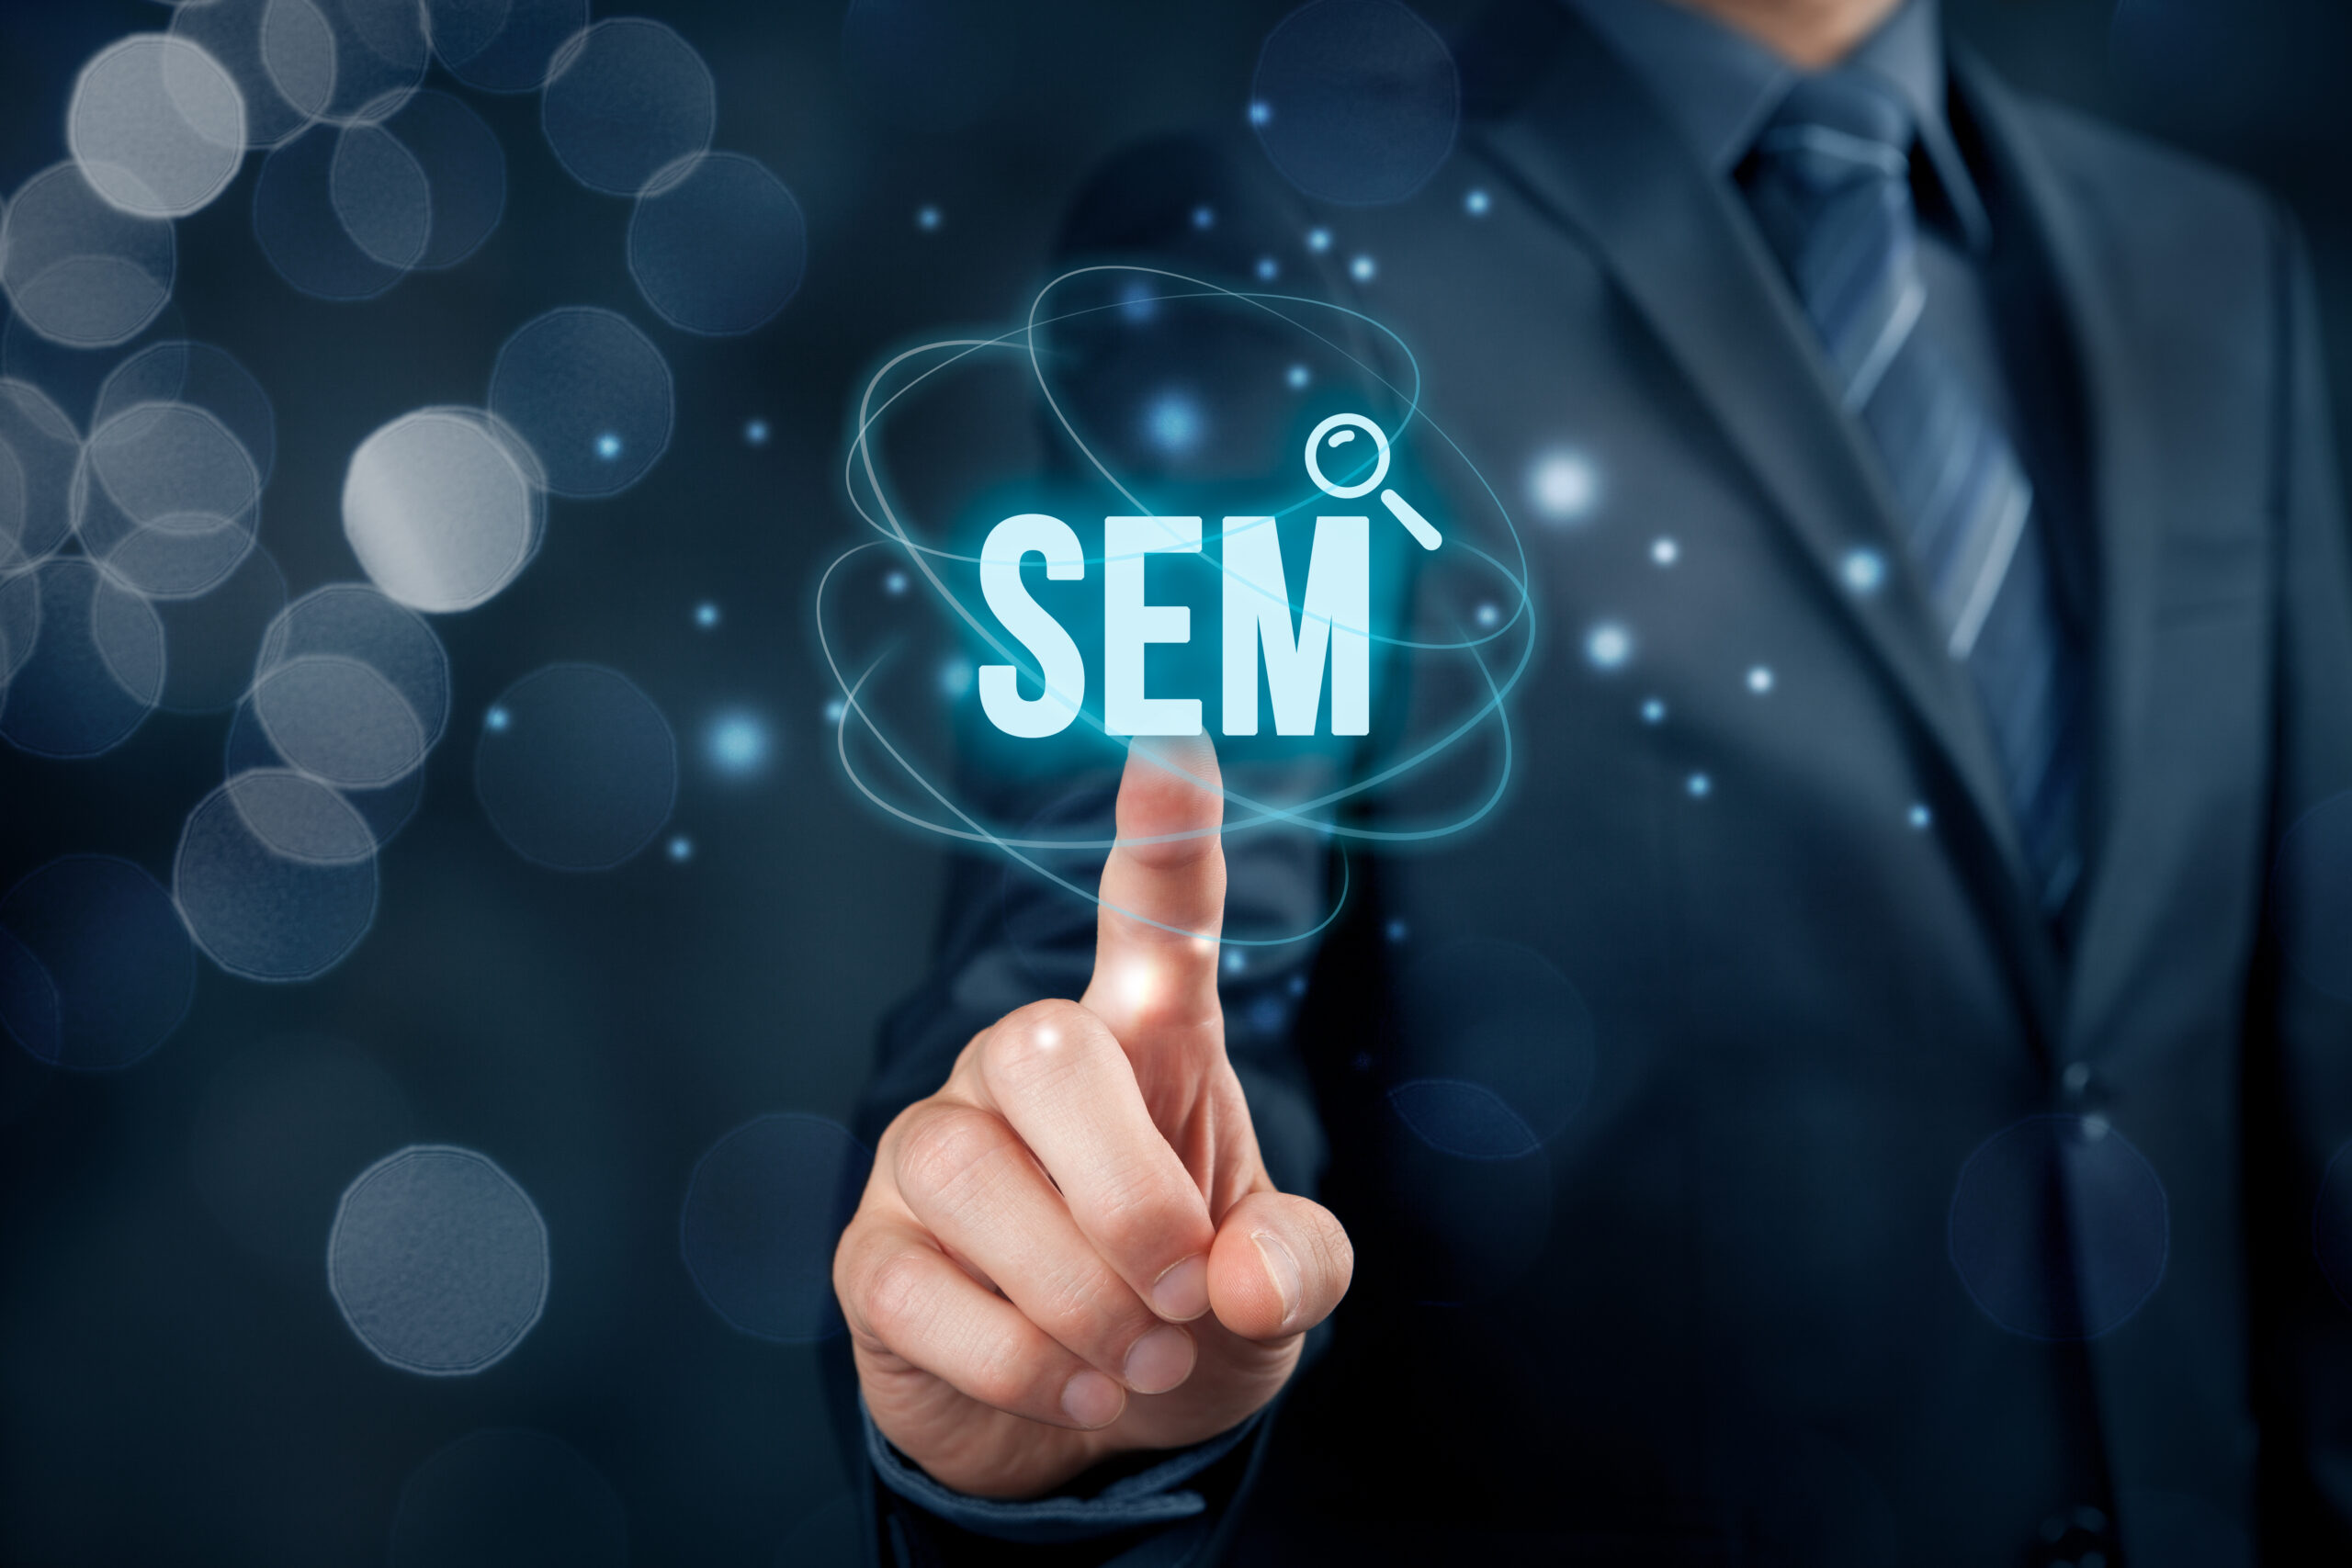 Search engine marketing - SEM concept. Businessman or programmer is focused to improve SEM and web traffic.